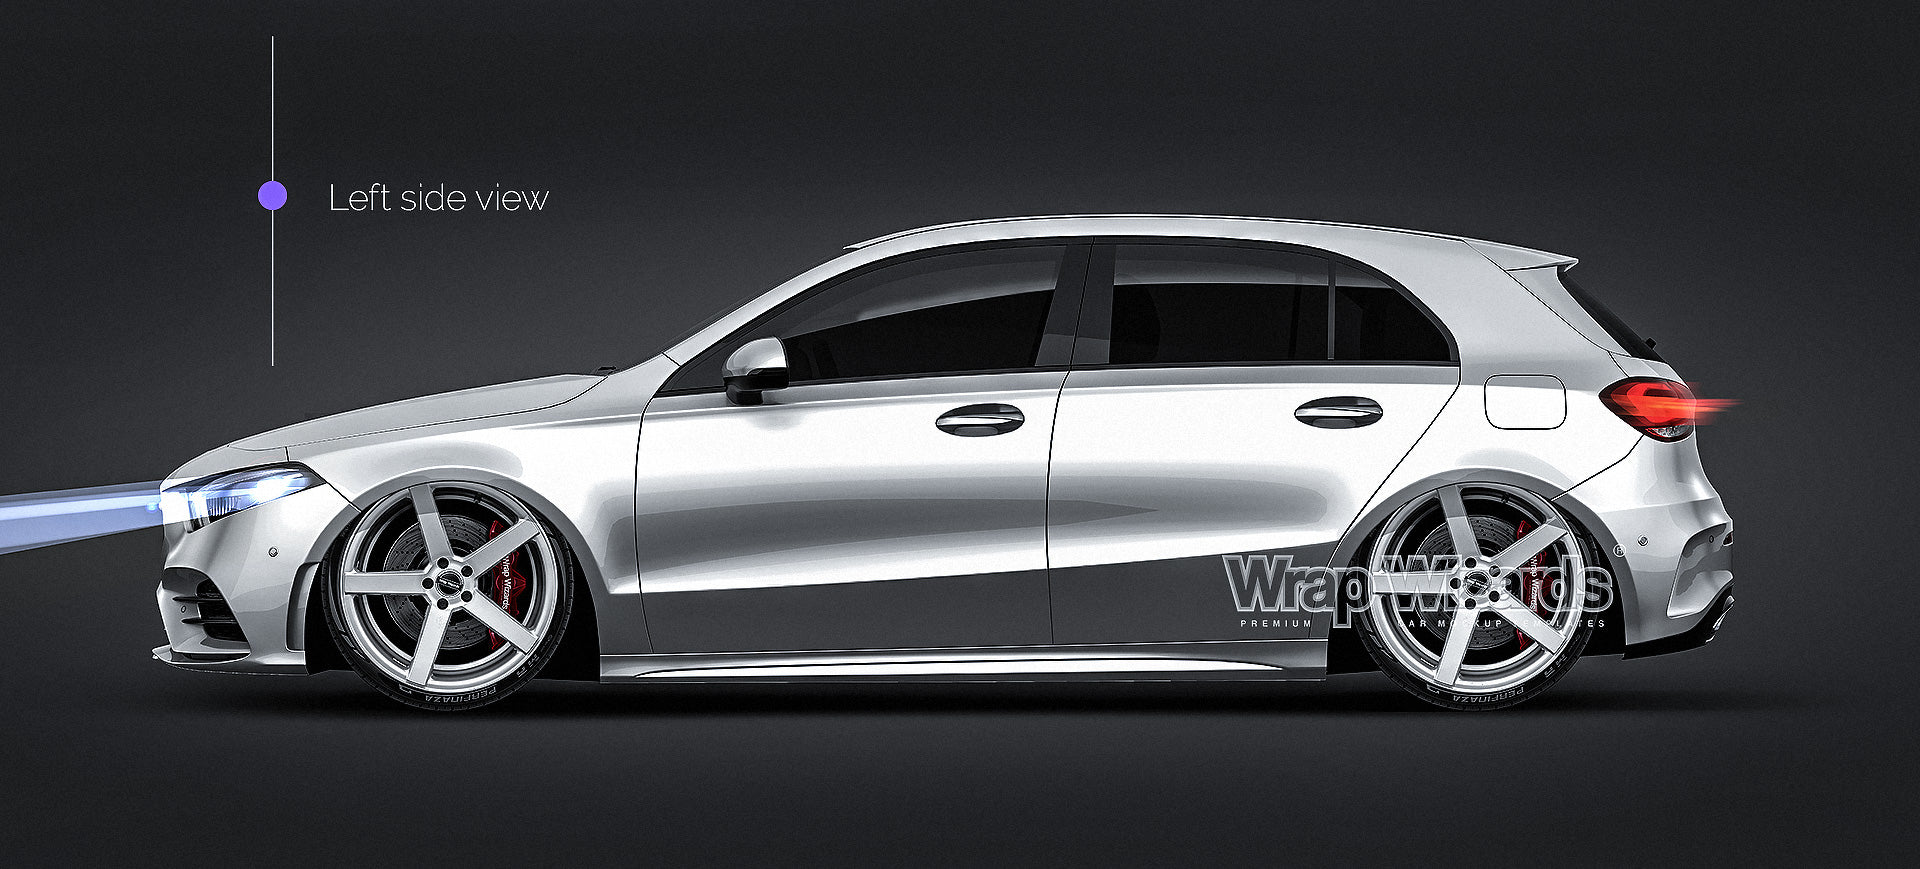 Mercedes-Benz A-Class AMG 2019 glossy finish - all sides Car Mockup Template.psd